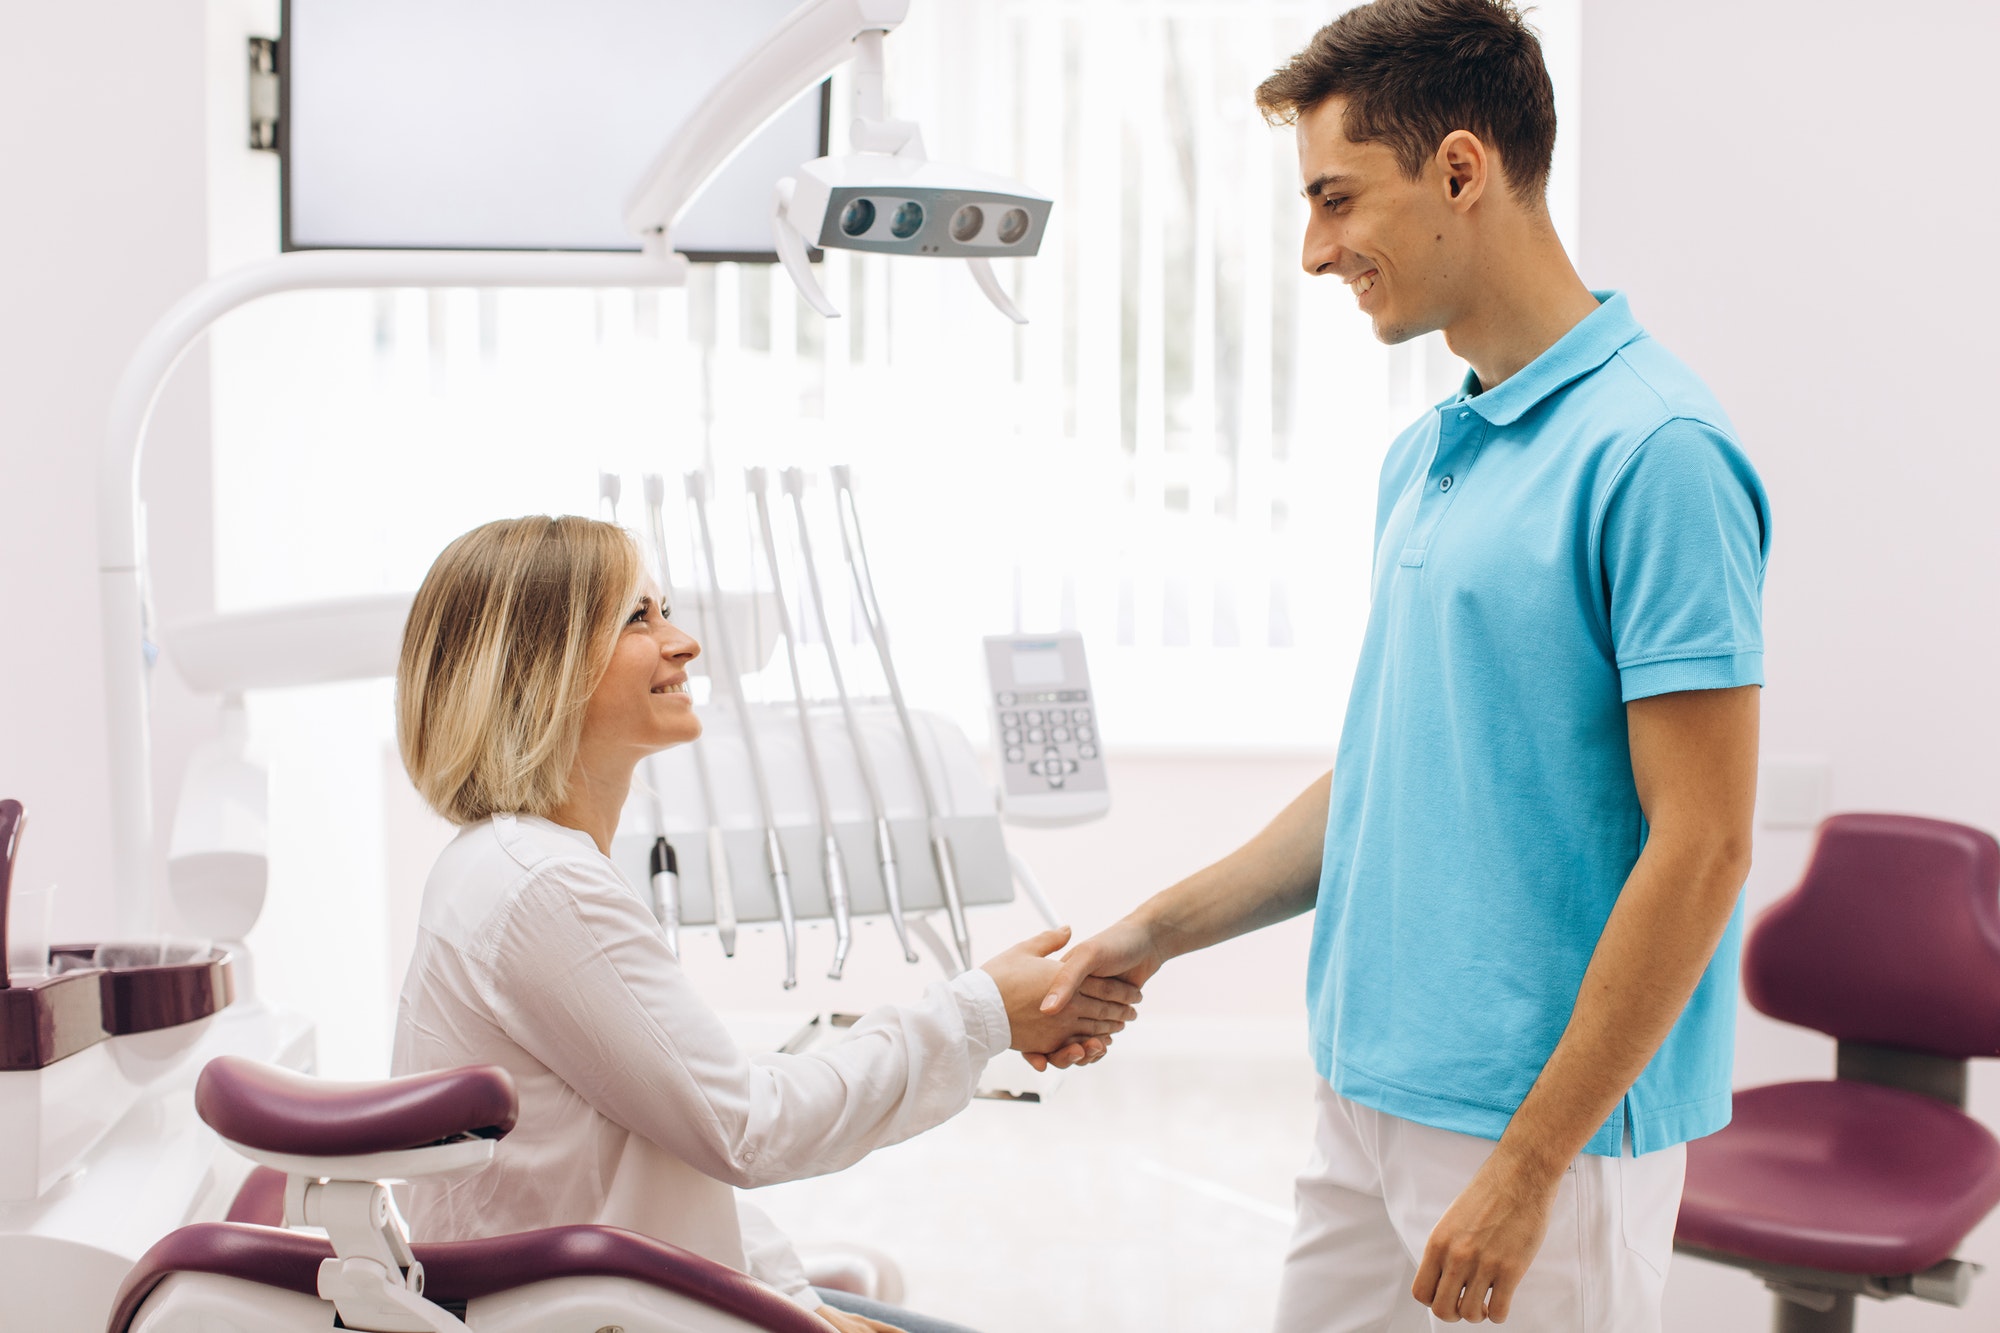 The dentist consults with his female patient sitting in a dental chair